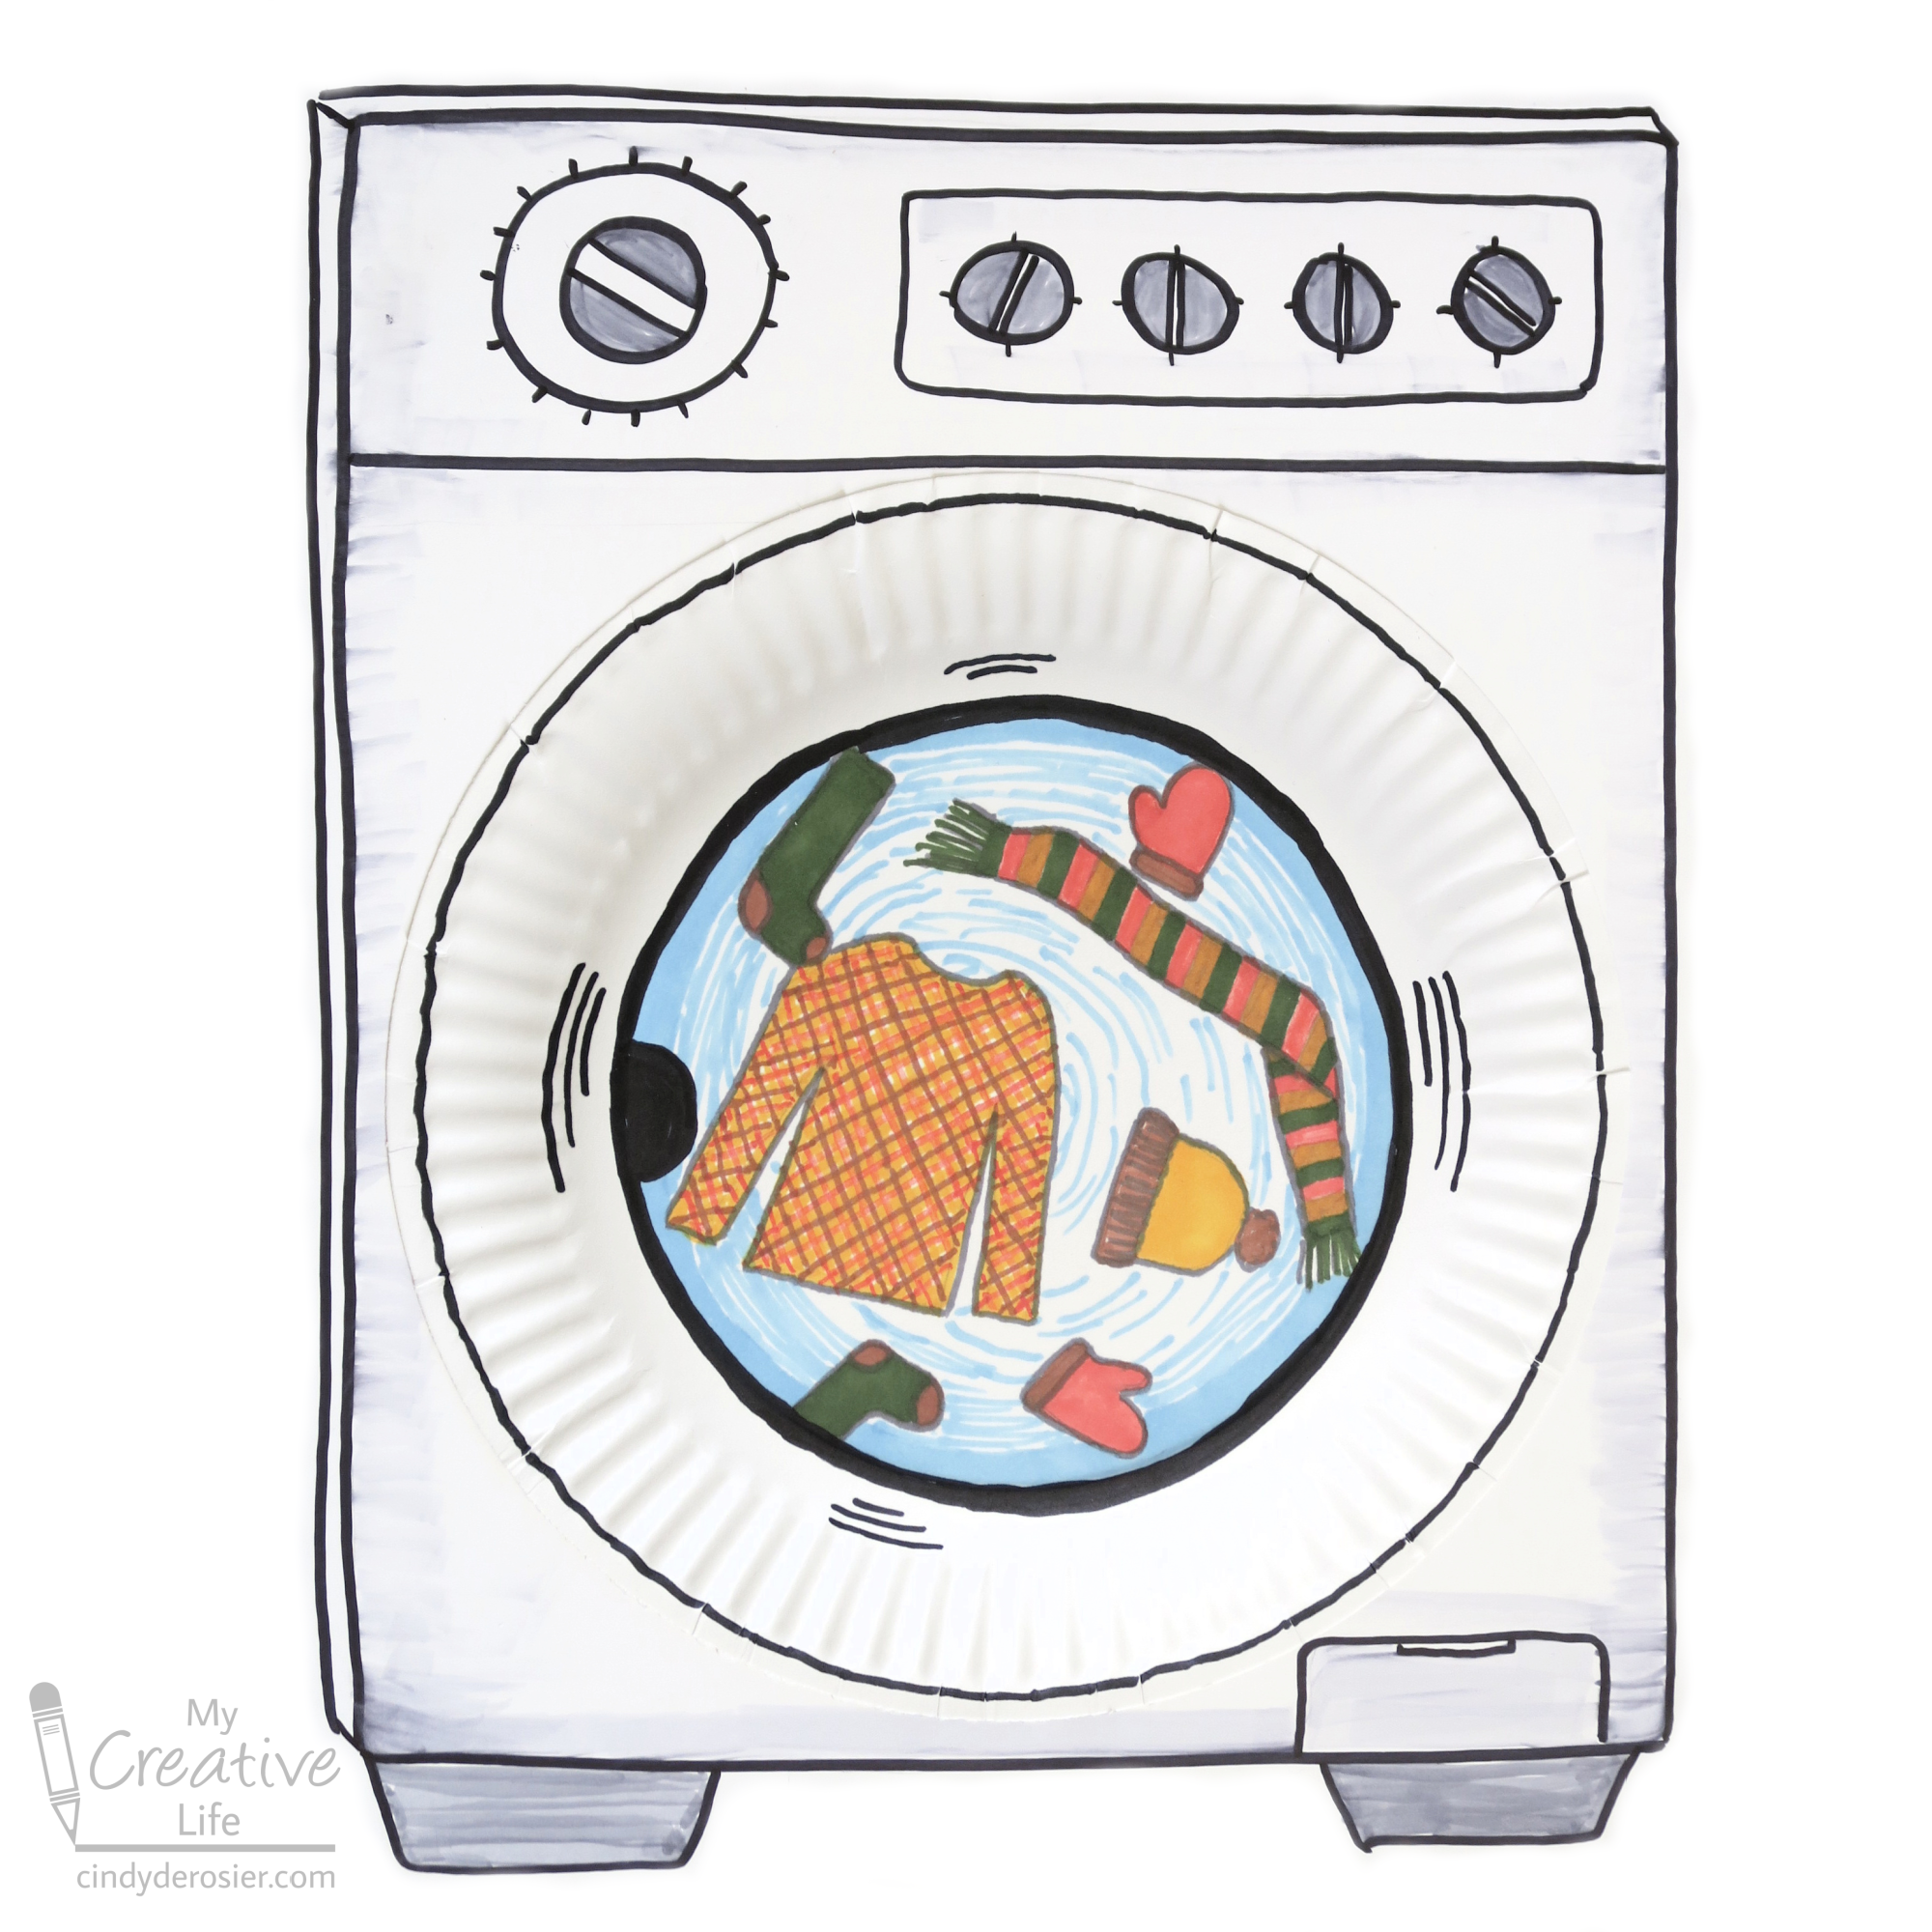 Technical drawing of a washing machine in an... - Stock Illustration  [76879180] - PIXTA